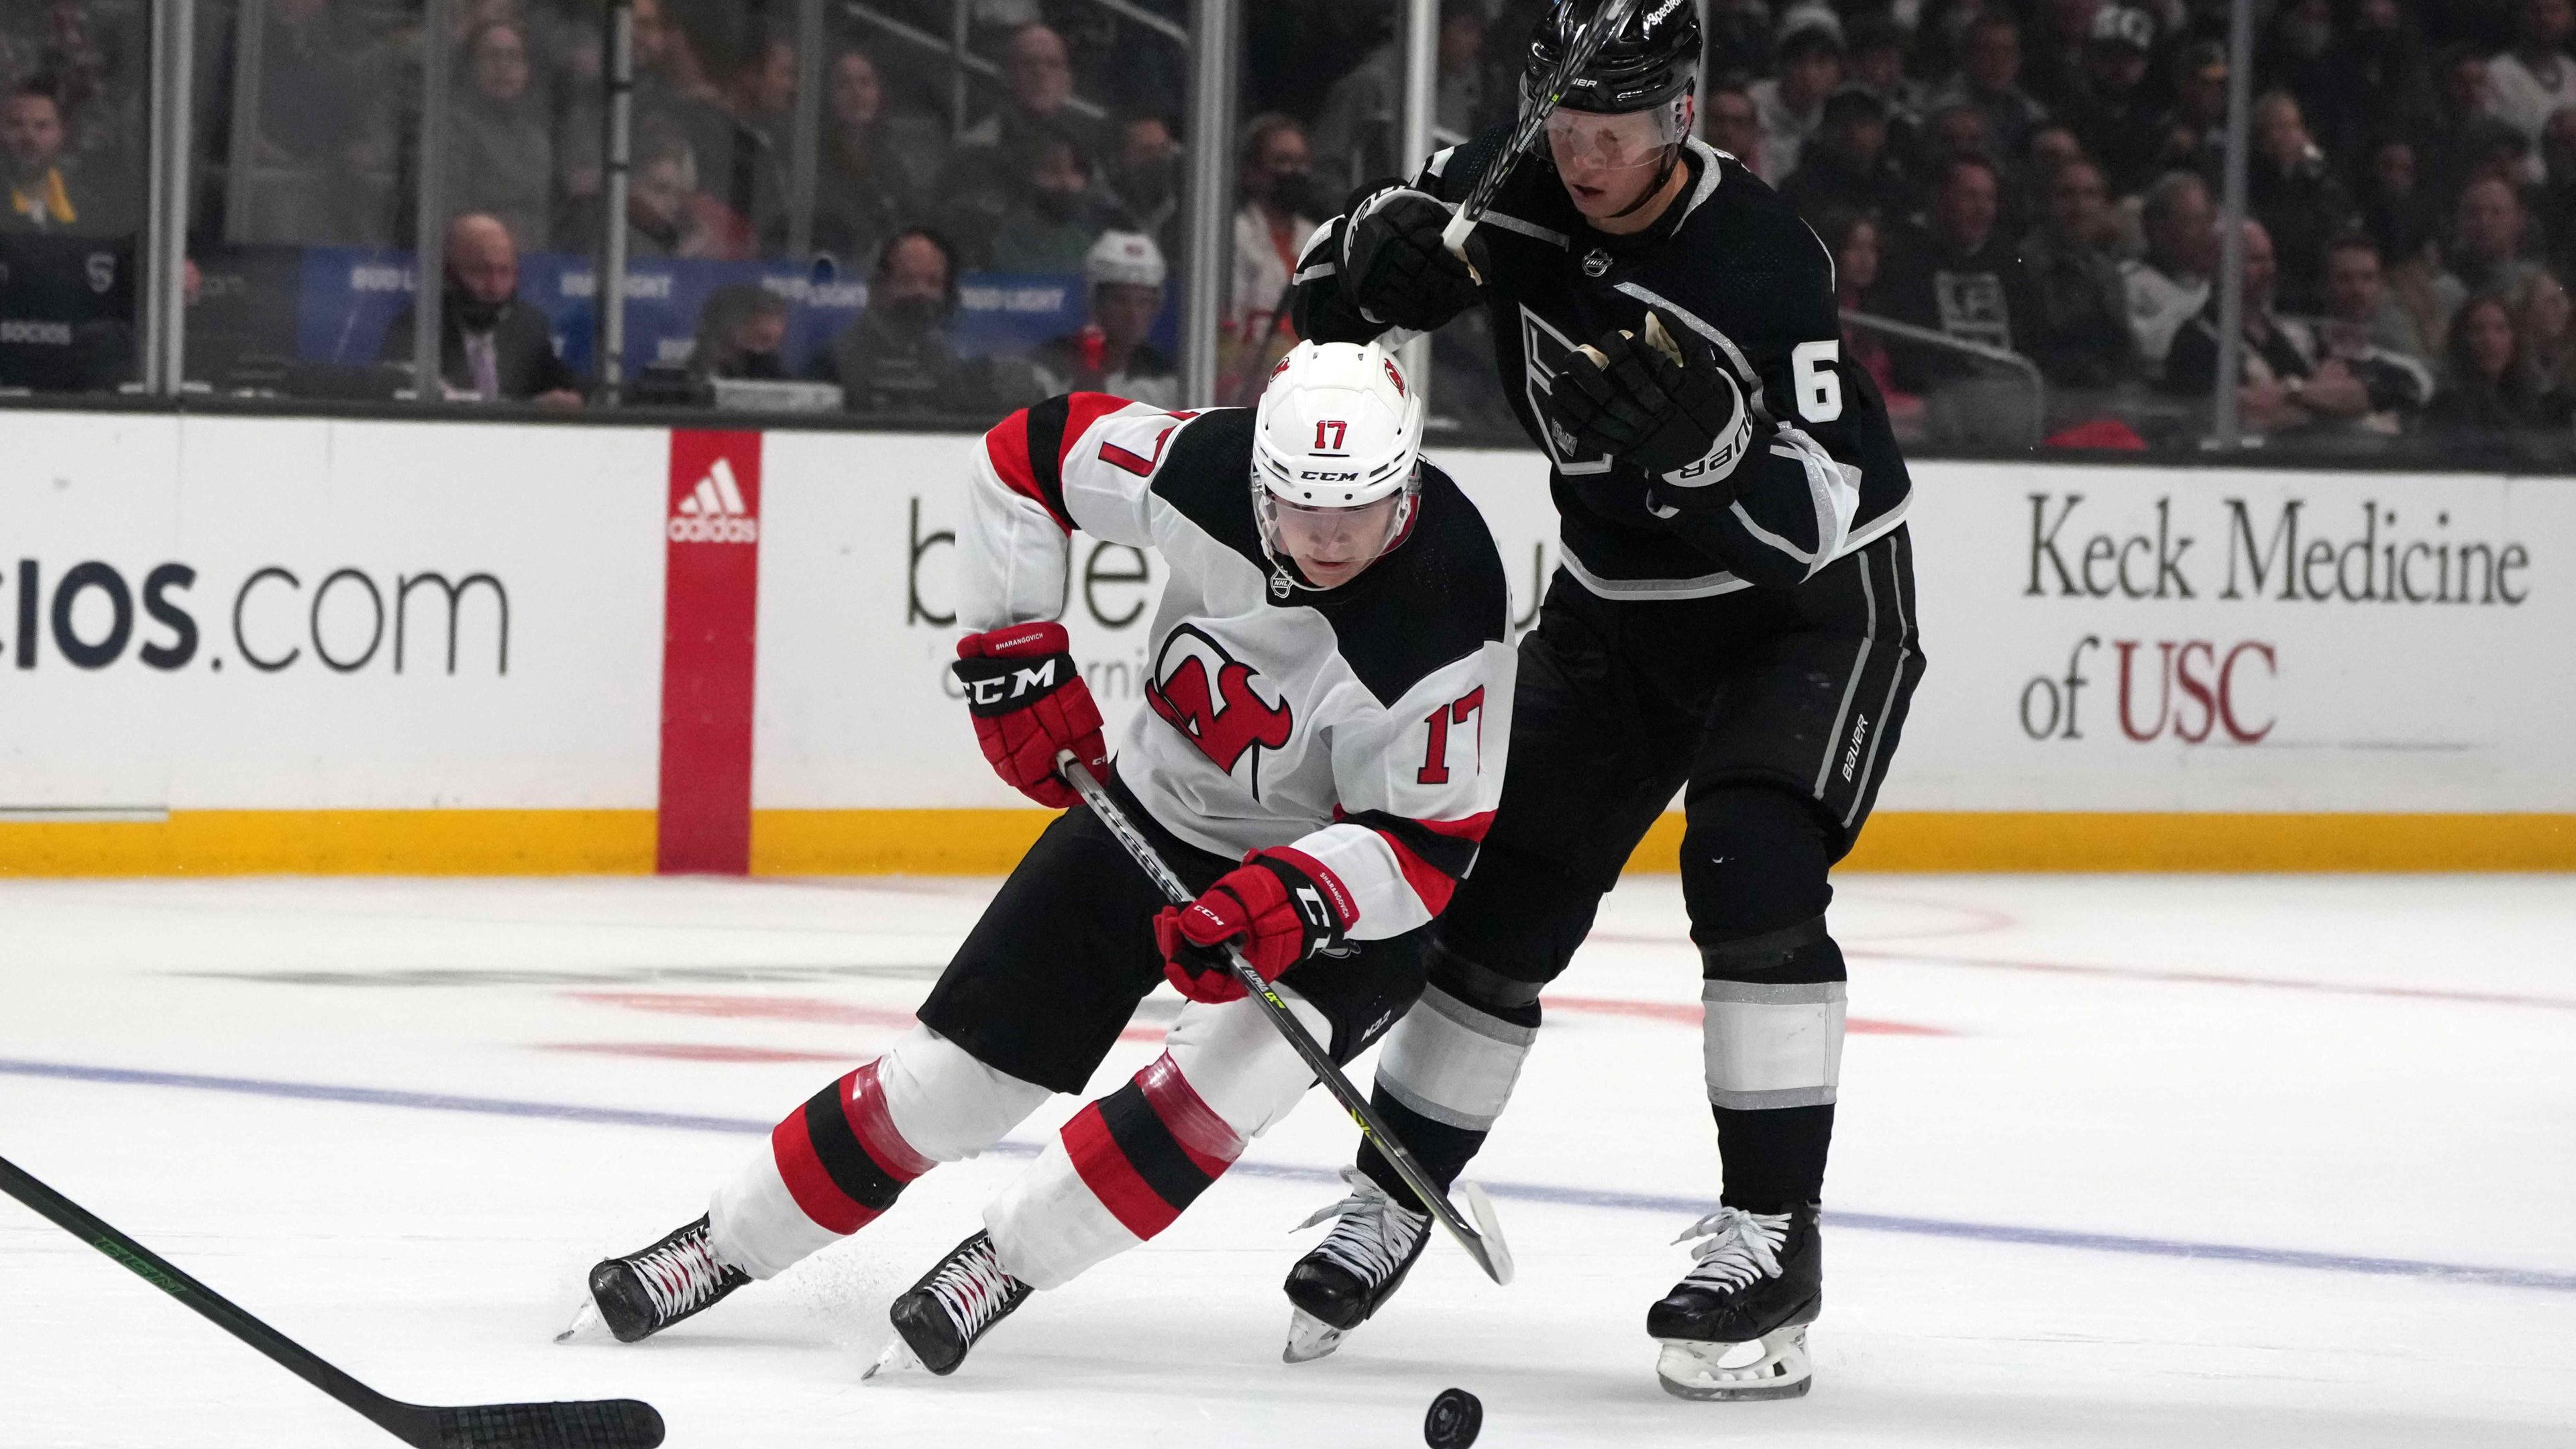 Nov 5, 2021; Los Angeles, California, USA; New Jersey Devils center Yegor Sharangovich (17) battles for the puck with LA Kings defenseman Olli Maatta (6) in the first period at Staples Center. / Kirby Lee-USA TODAY Sports